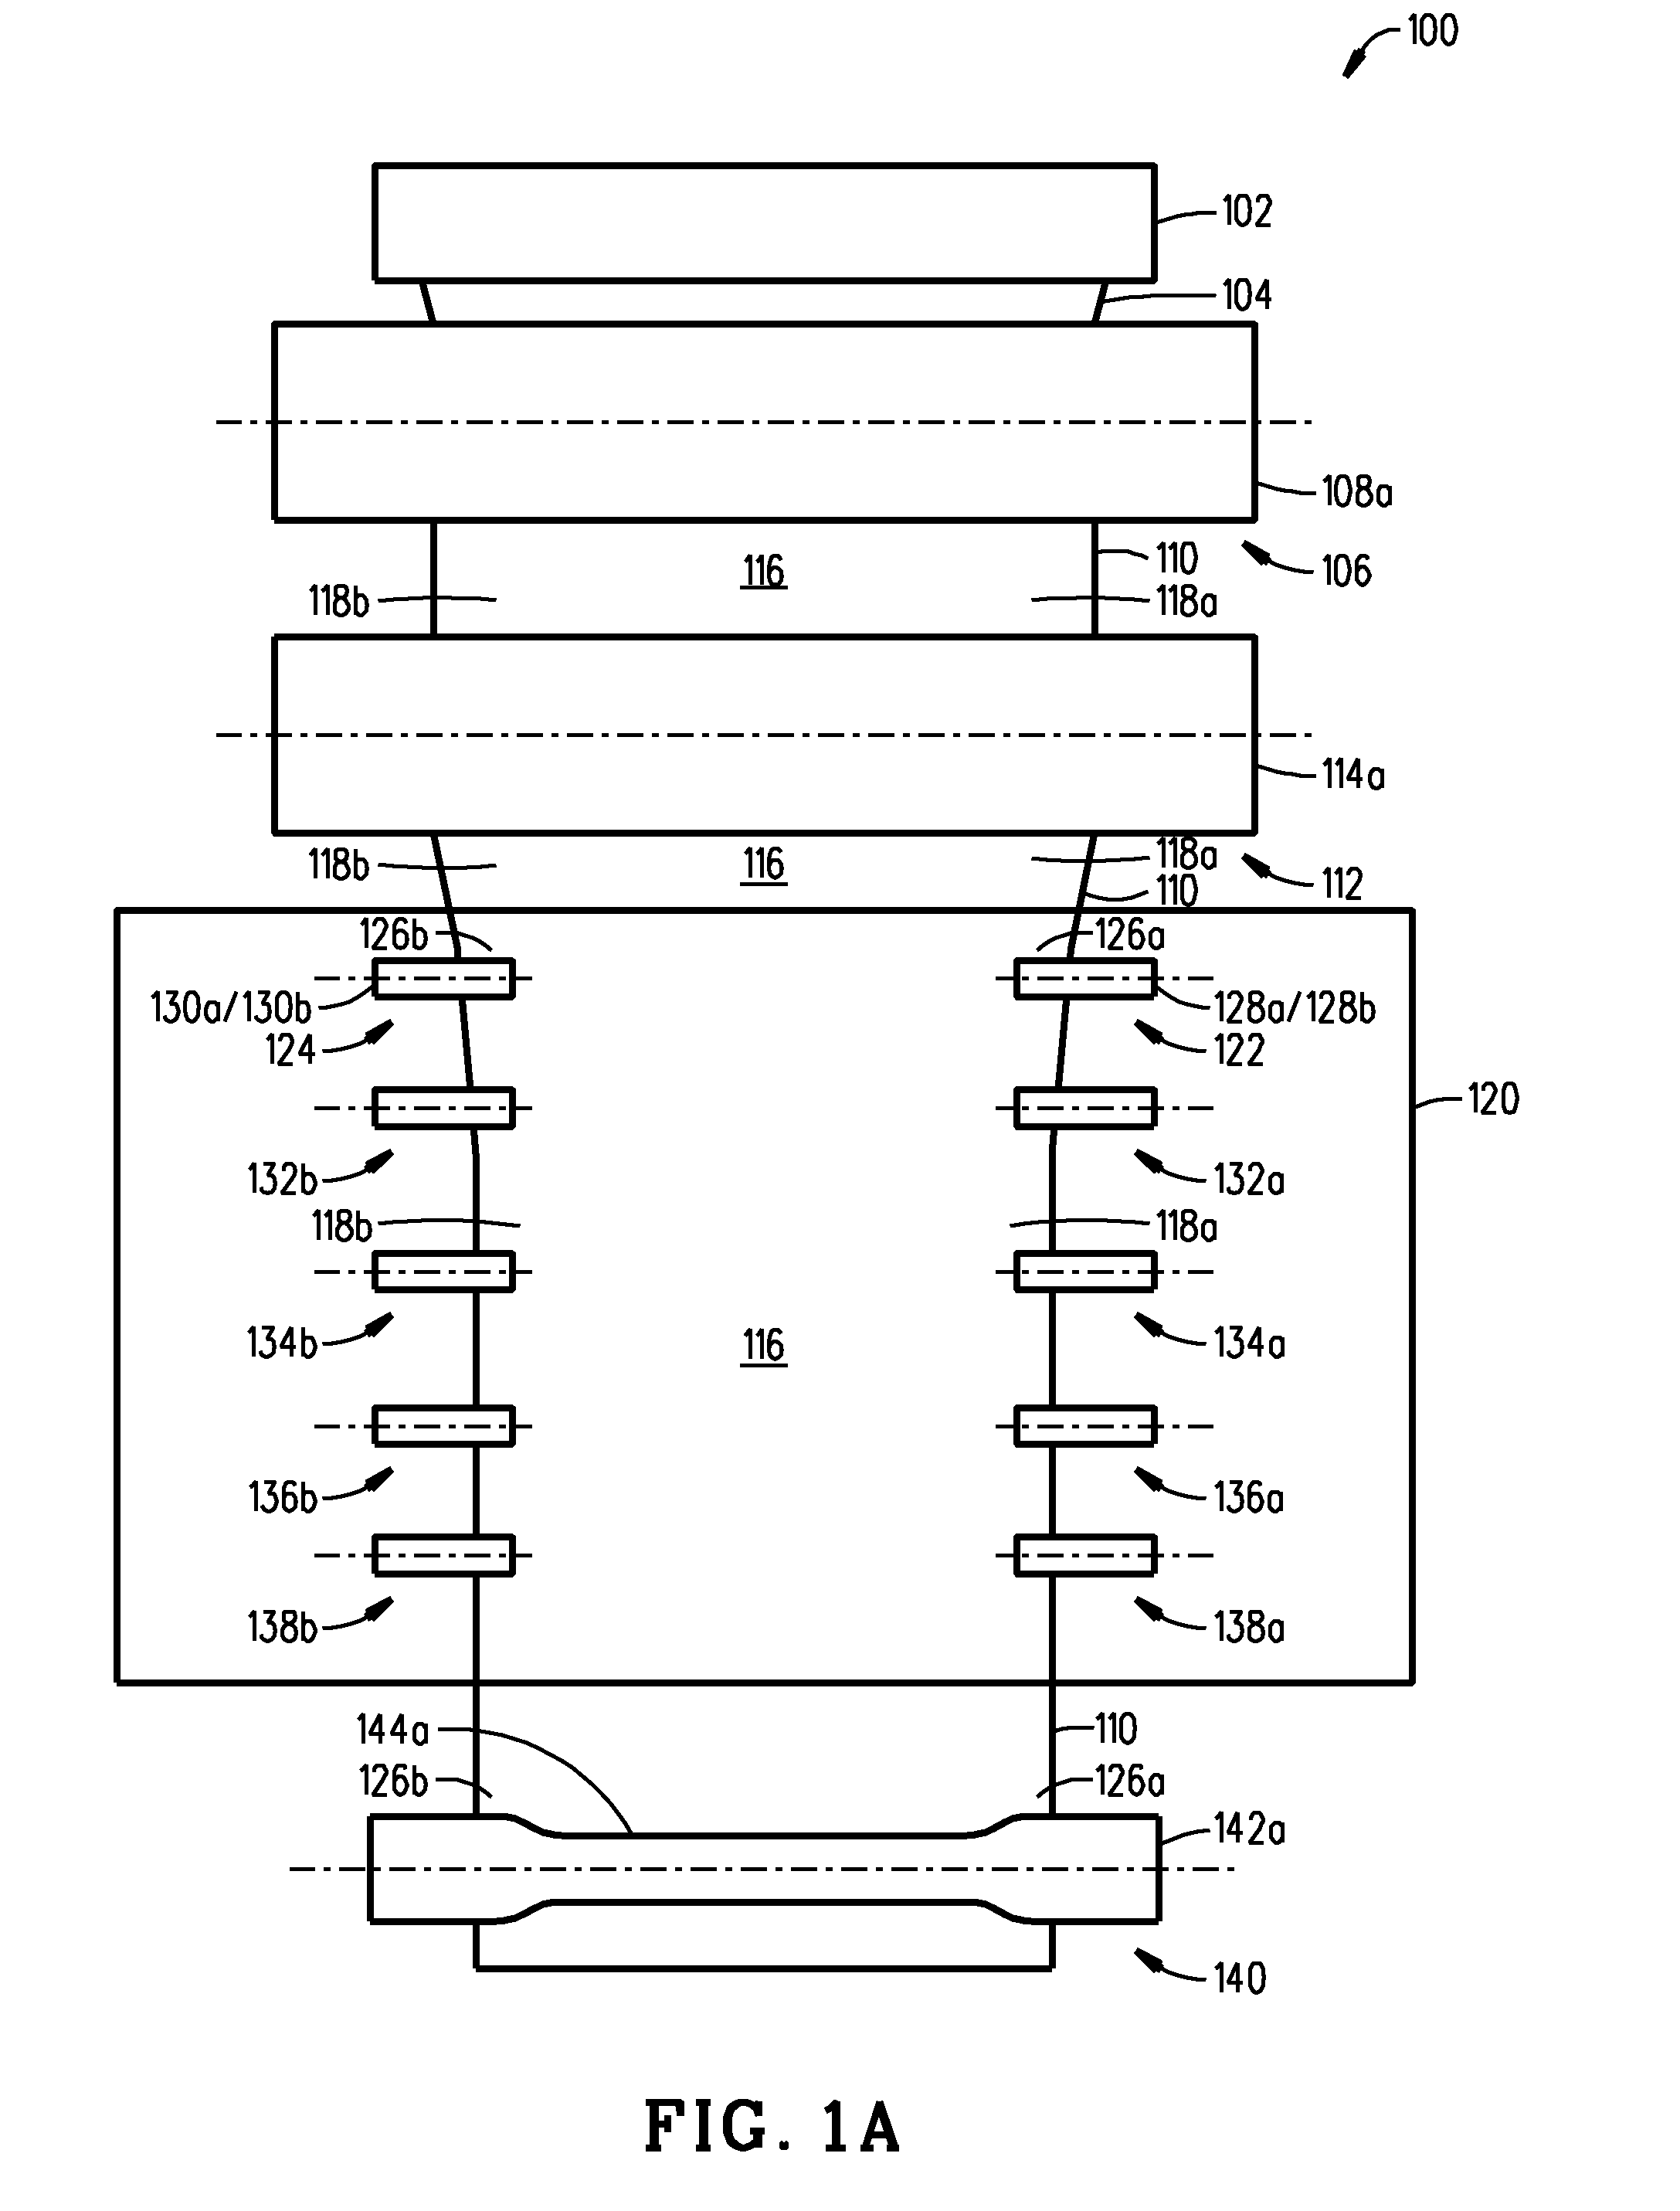 Glass manufacturing system and method for forming a high quality thin glass sheet